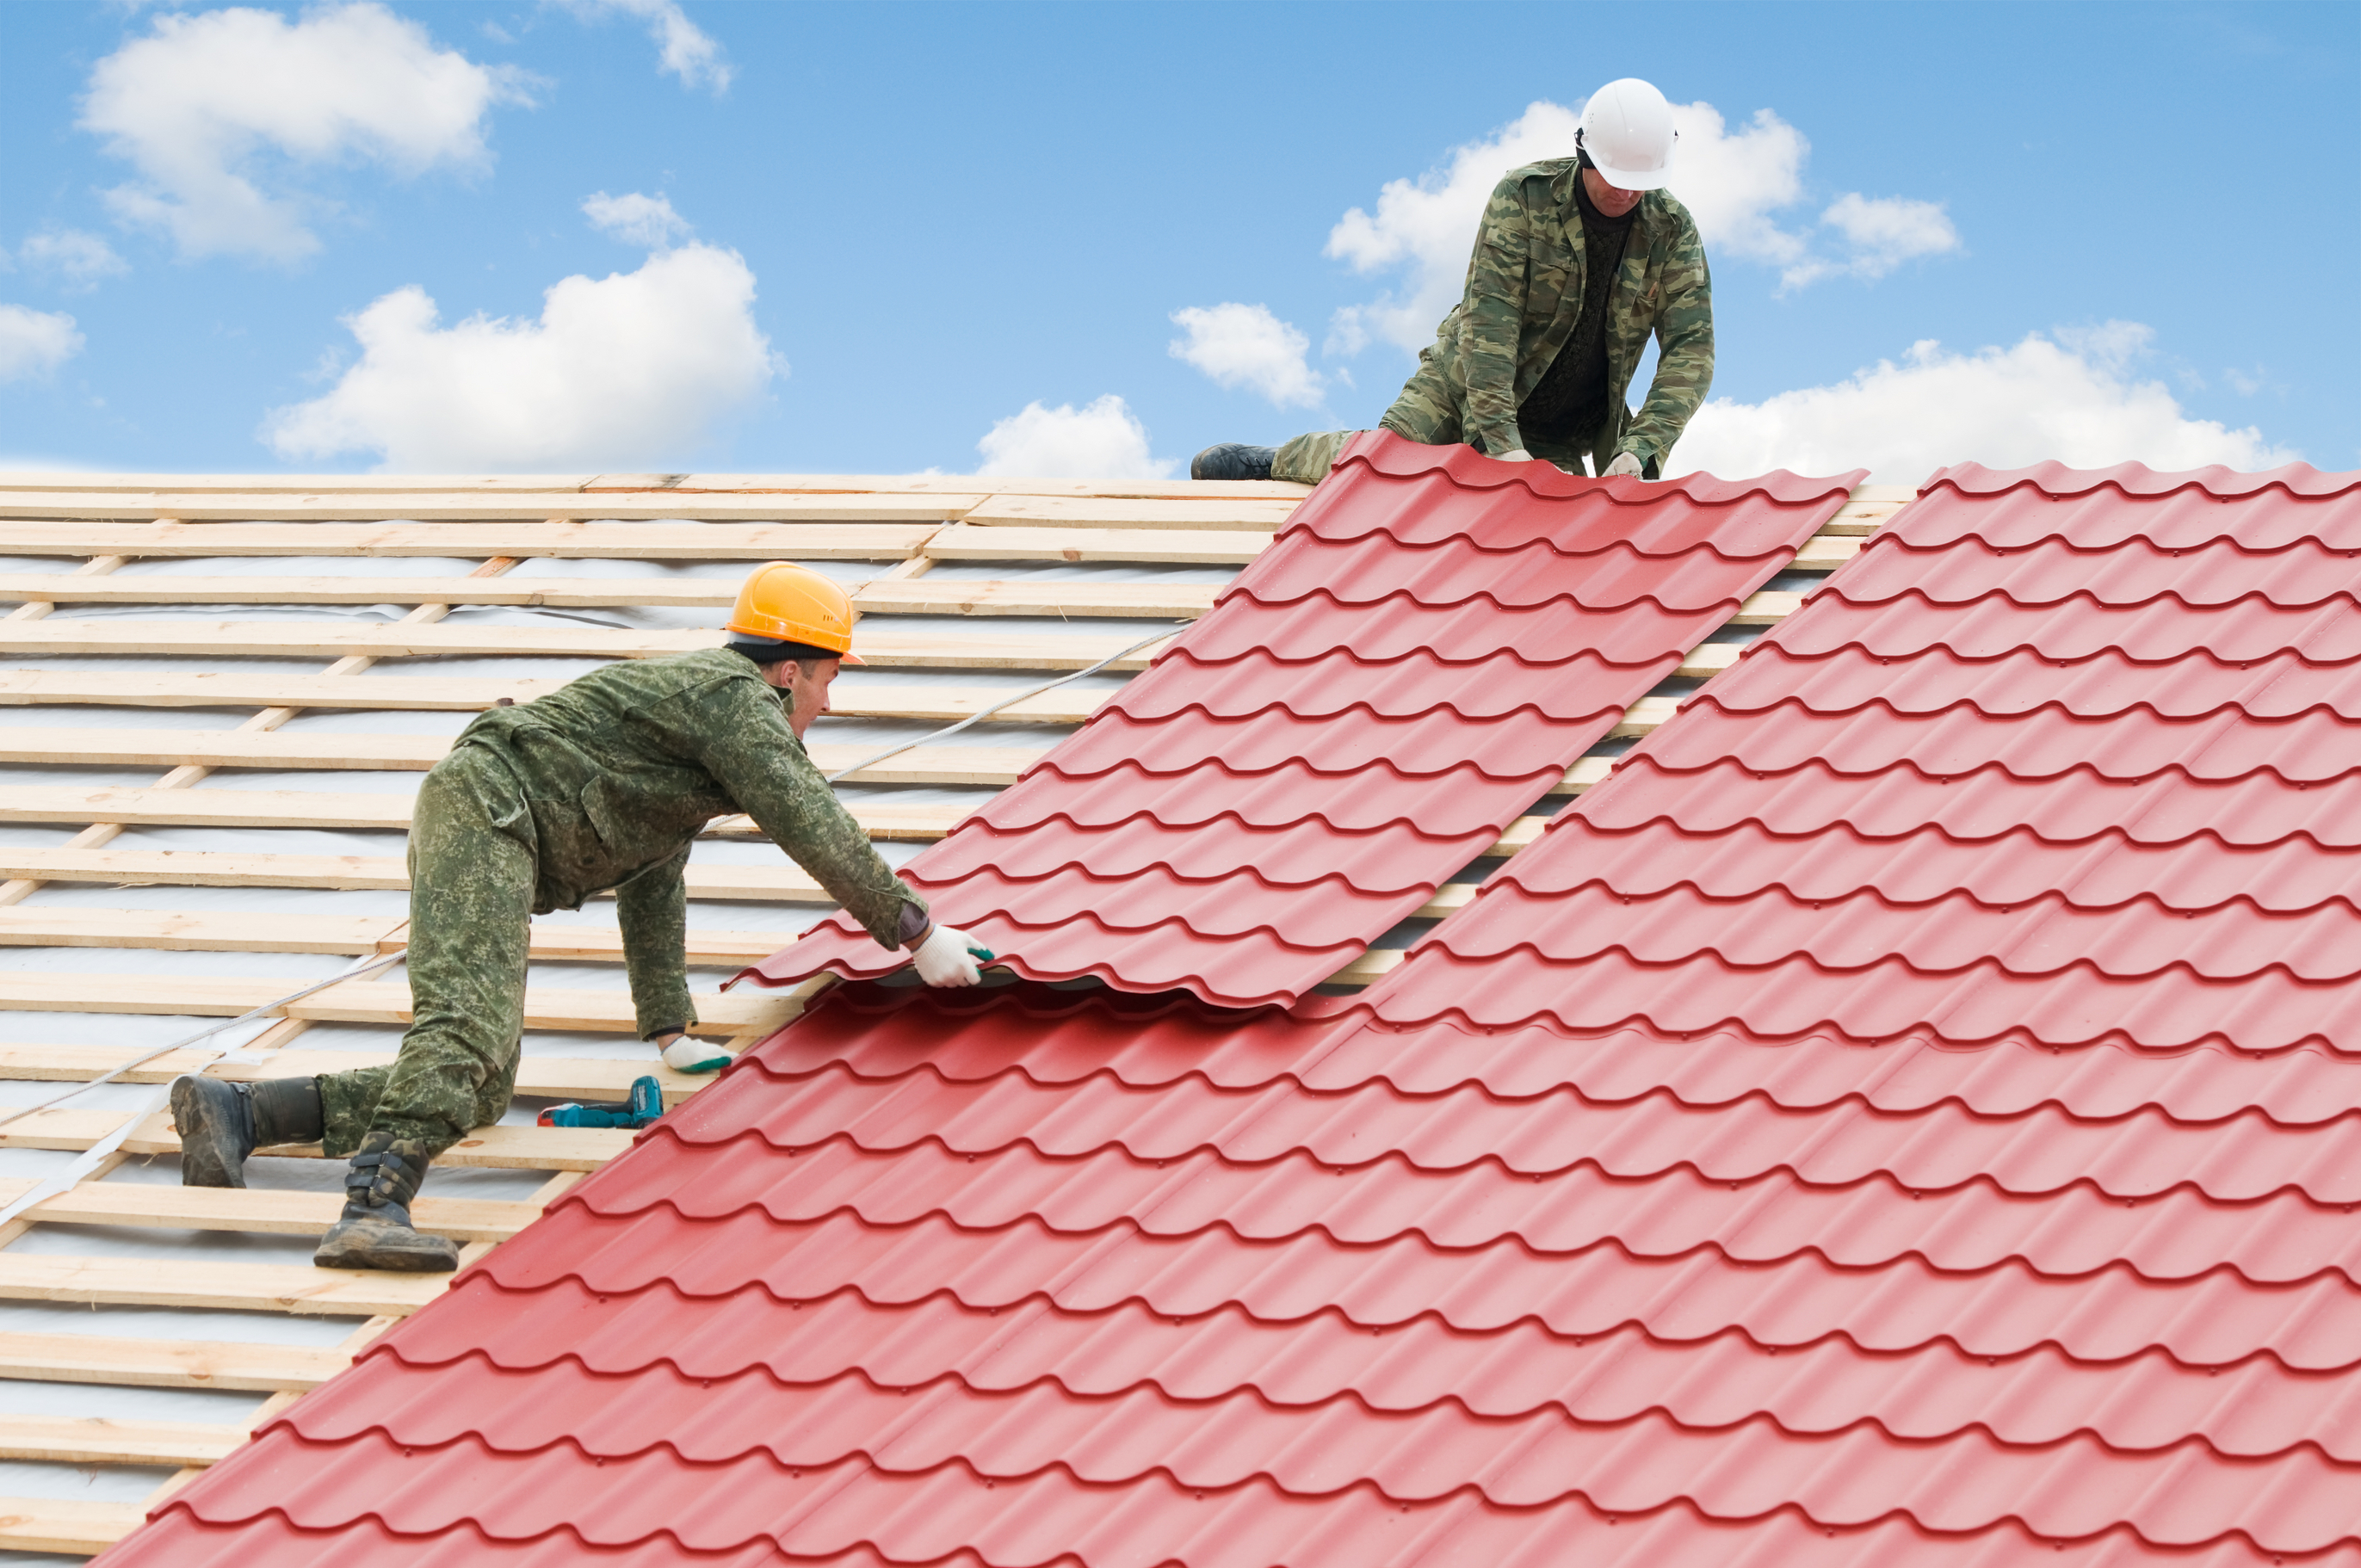 What To Look For In A Roofing Contractor